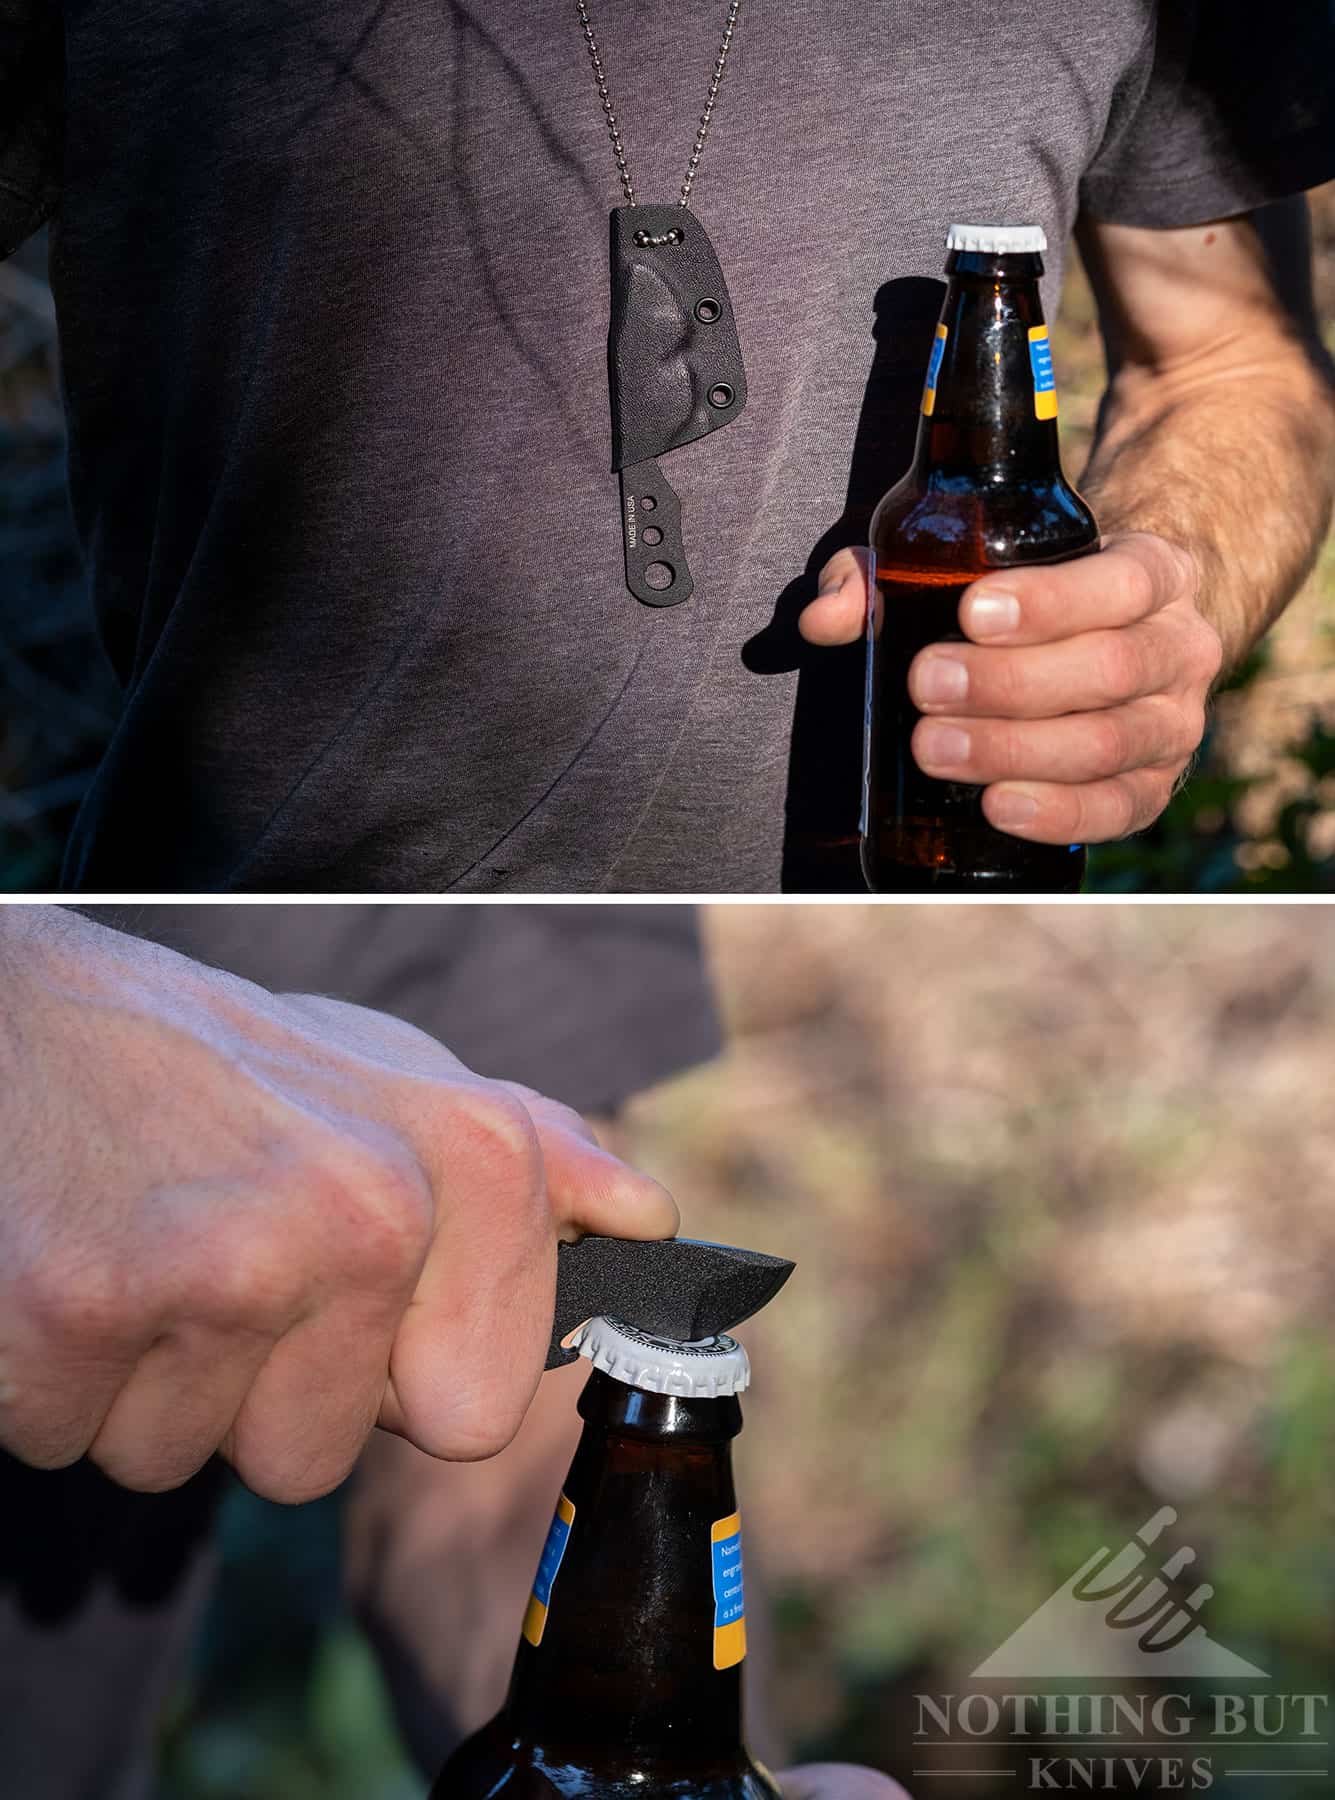 This two image montage shows the TOPS Bartender Defender in its sheath and outside the sheath opening a beer bottle. 